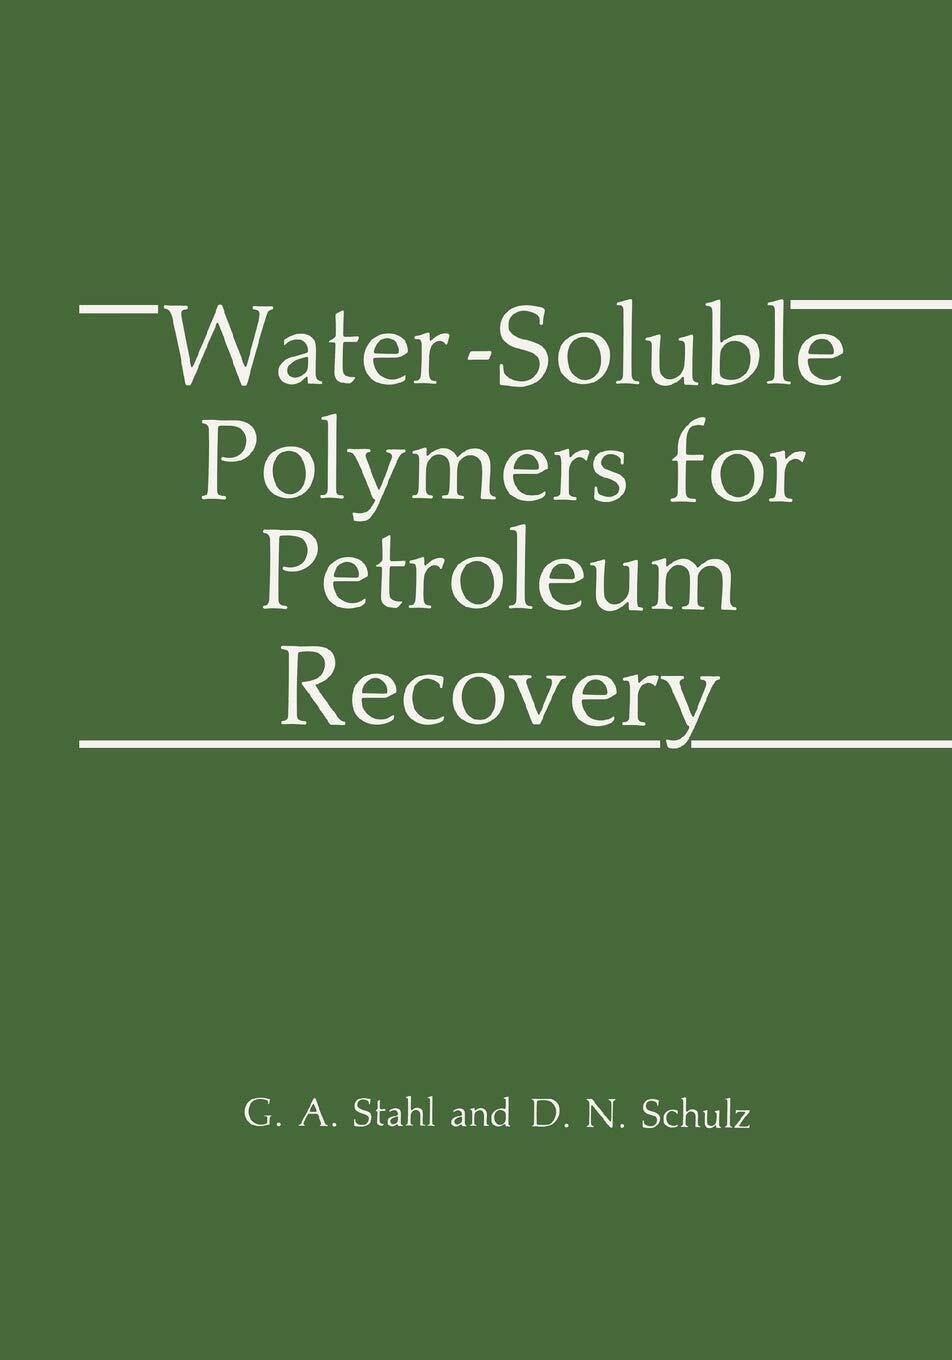 Water: Soluble Polymers for Petroleum Recovery - D. N. Schulz, G. A. Stahl -2010